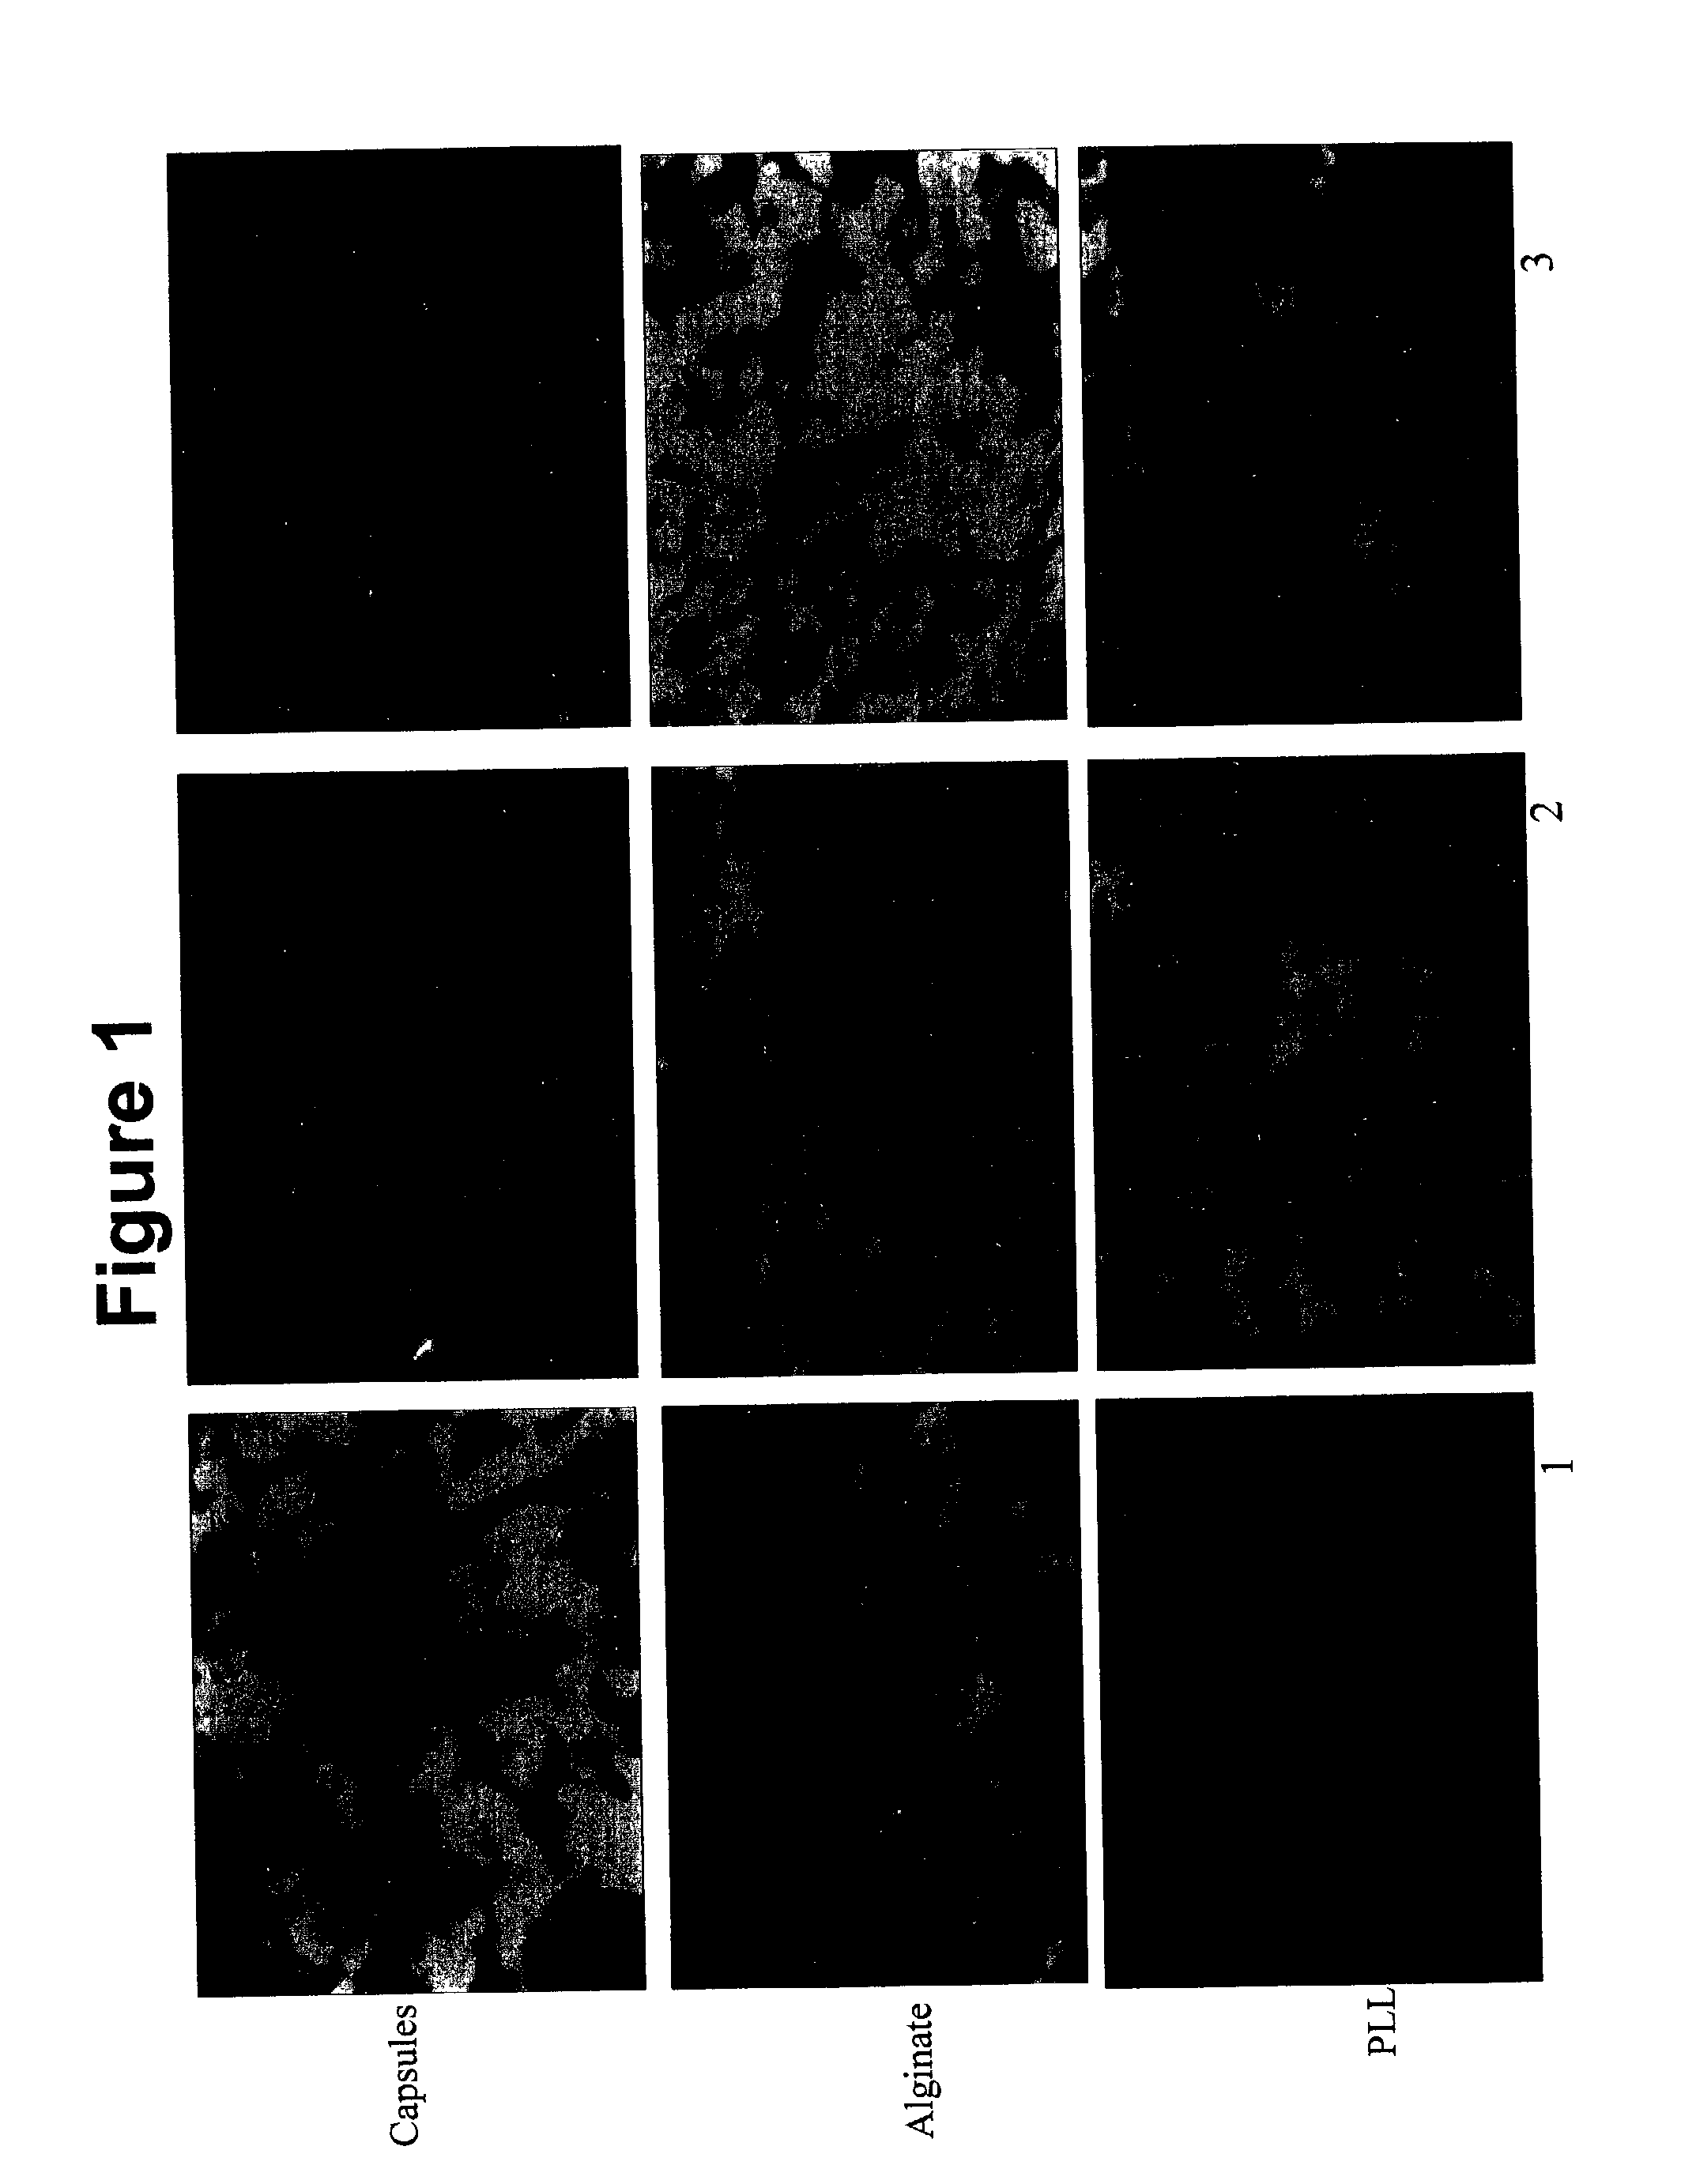 Oral administration of therapeutic agent coupled to transporting agent